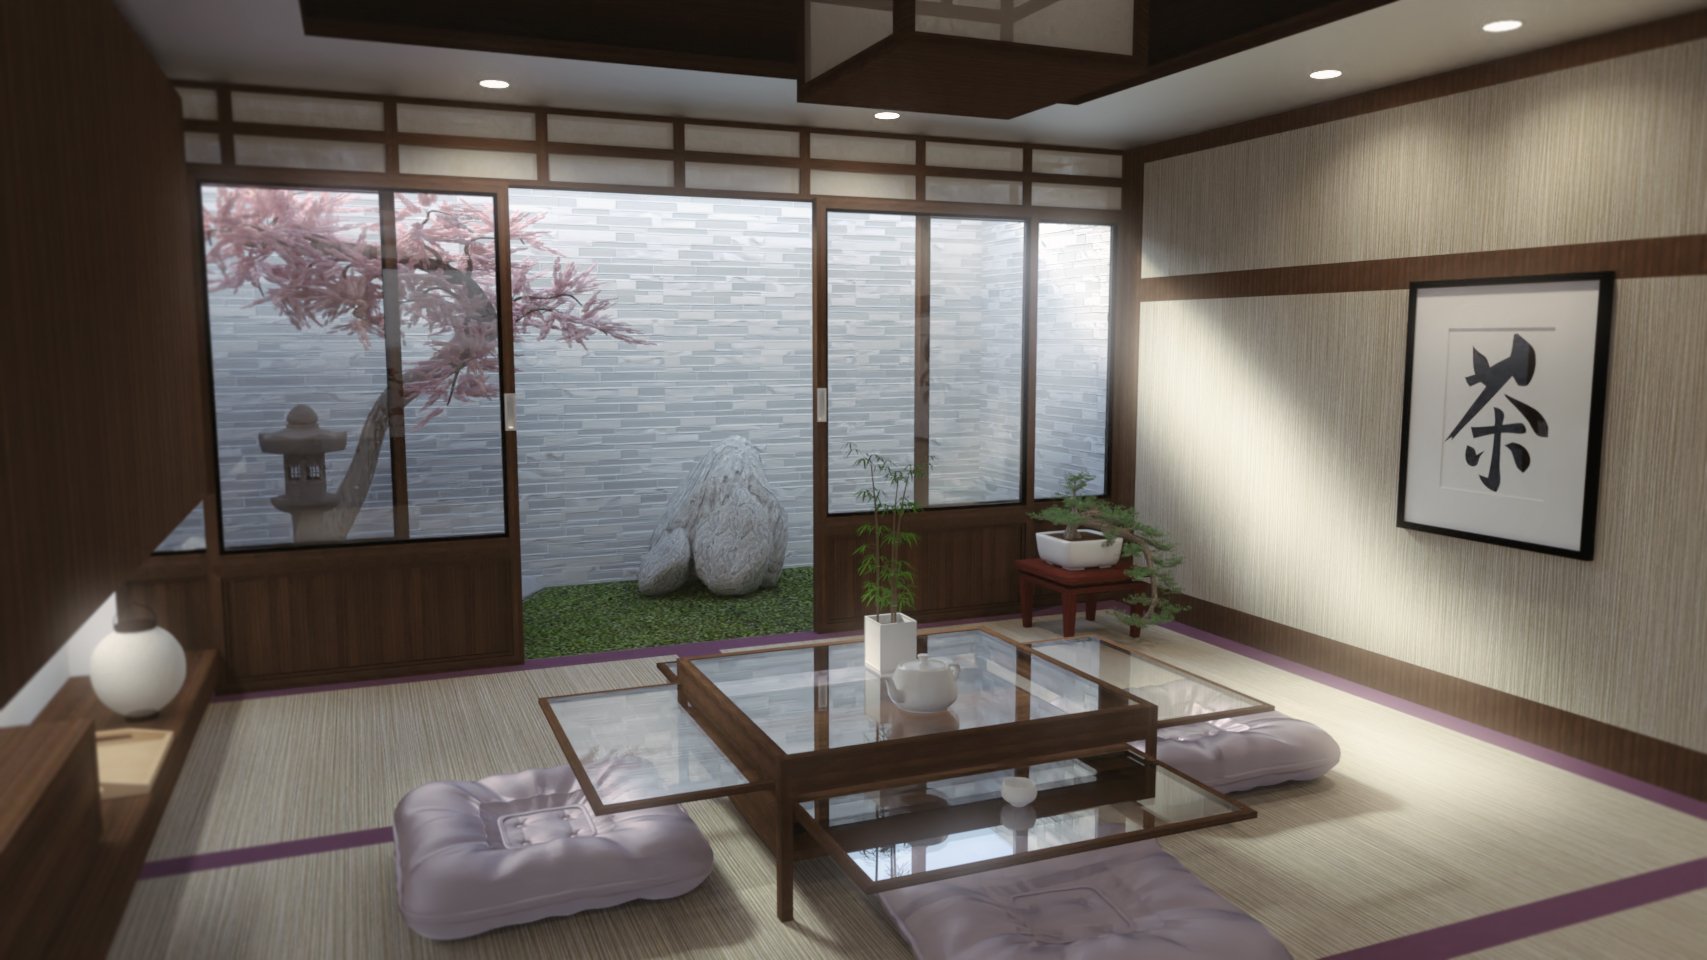 Japanese Dining Room by: Digitallab3D, 3D Models by Daz 3D